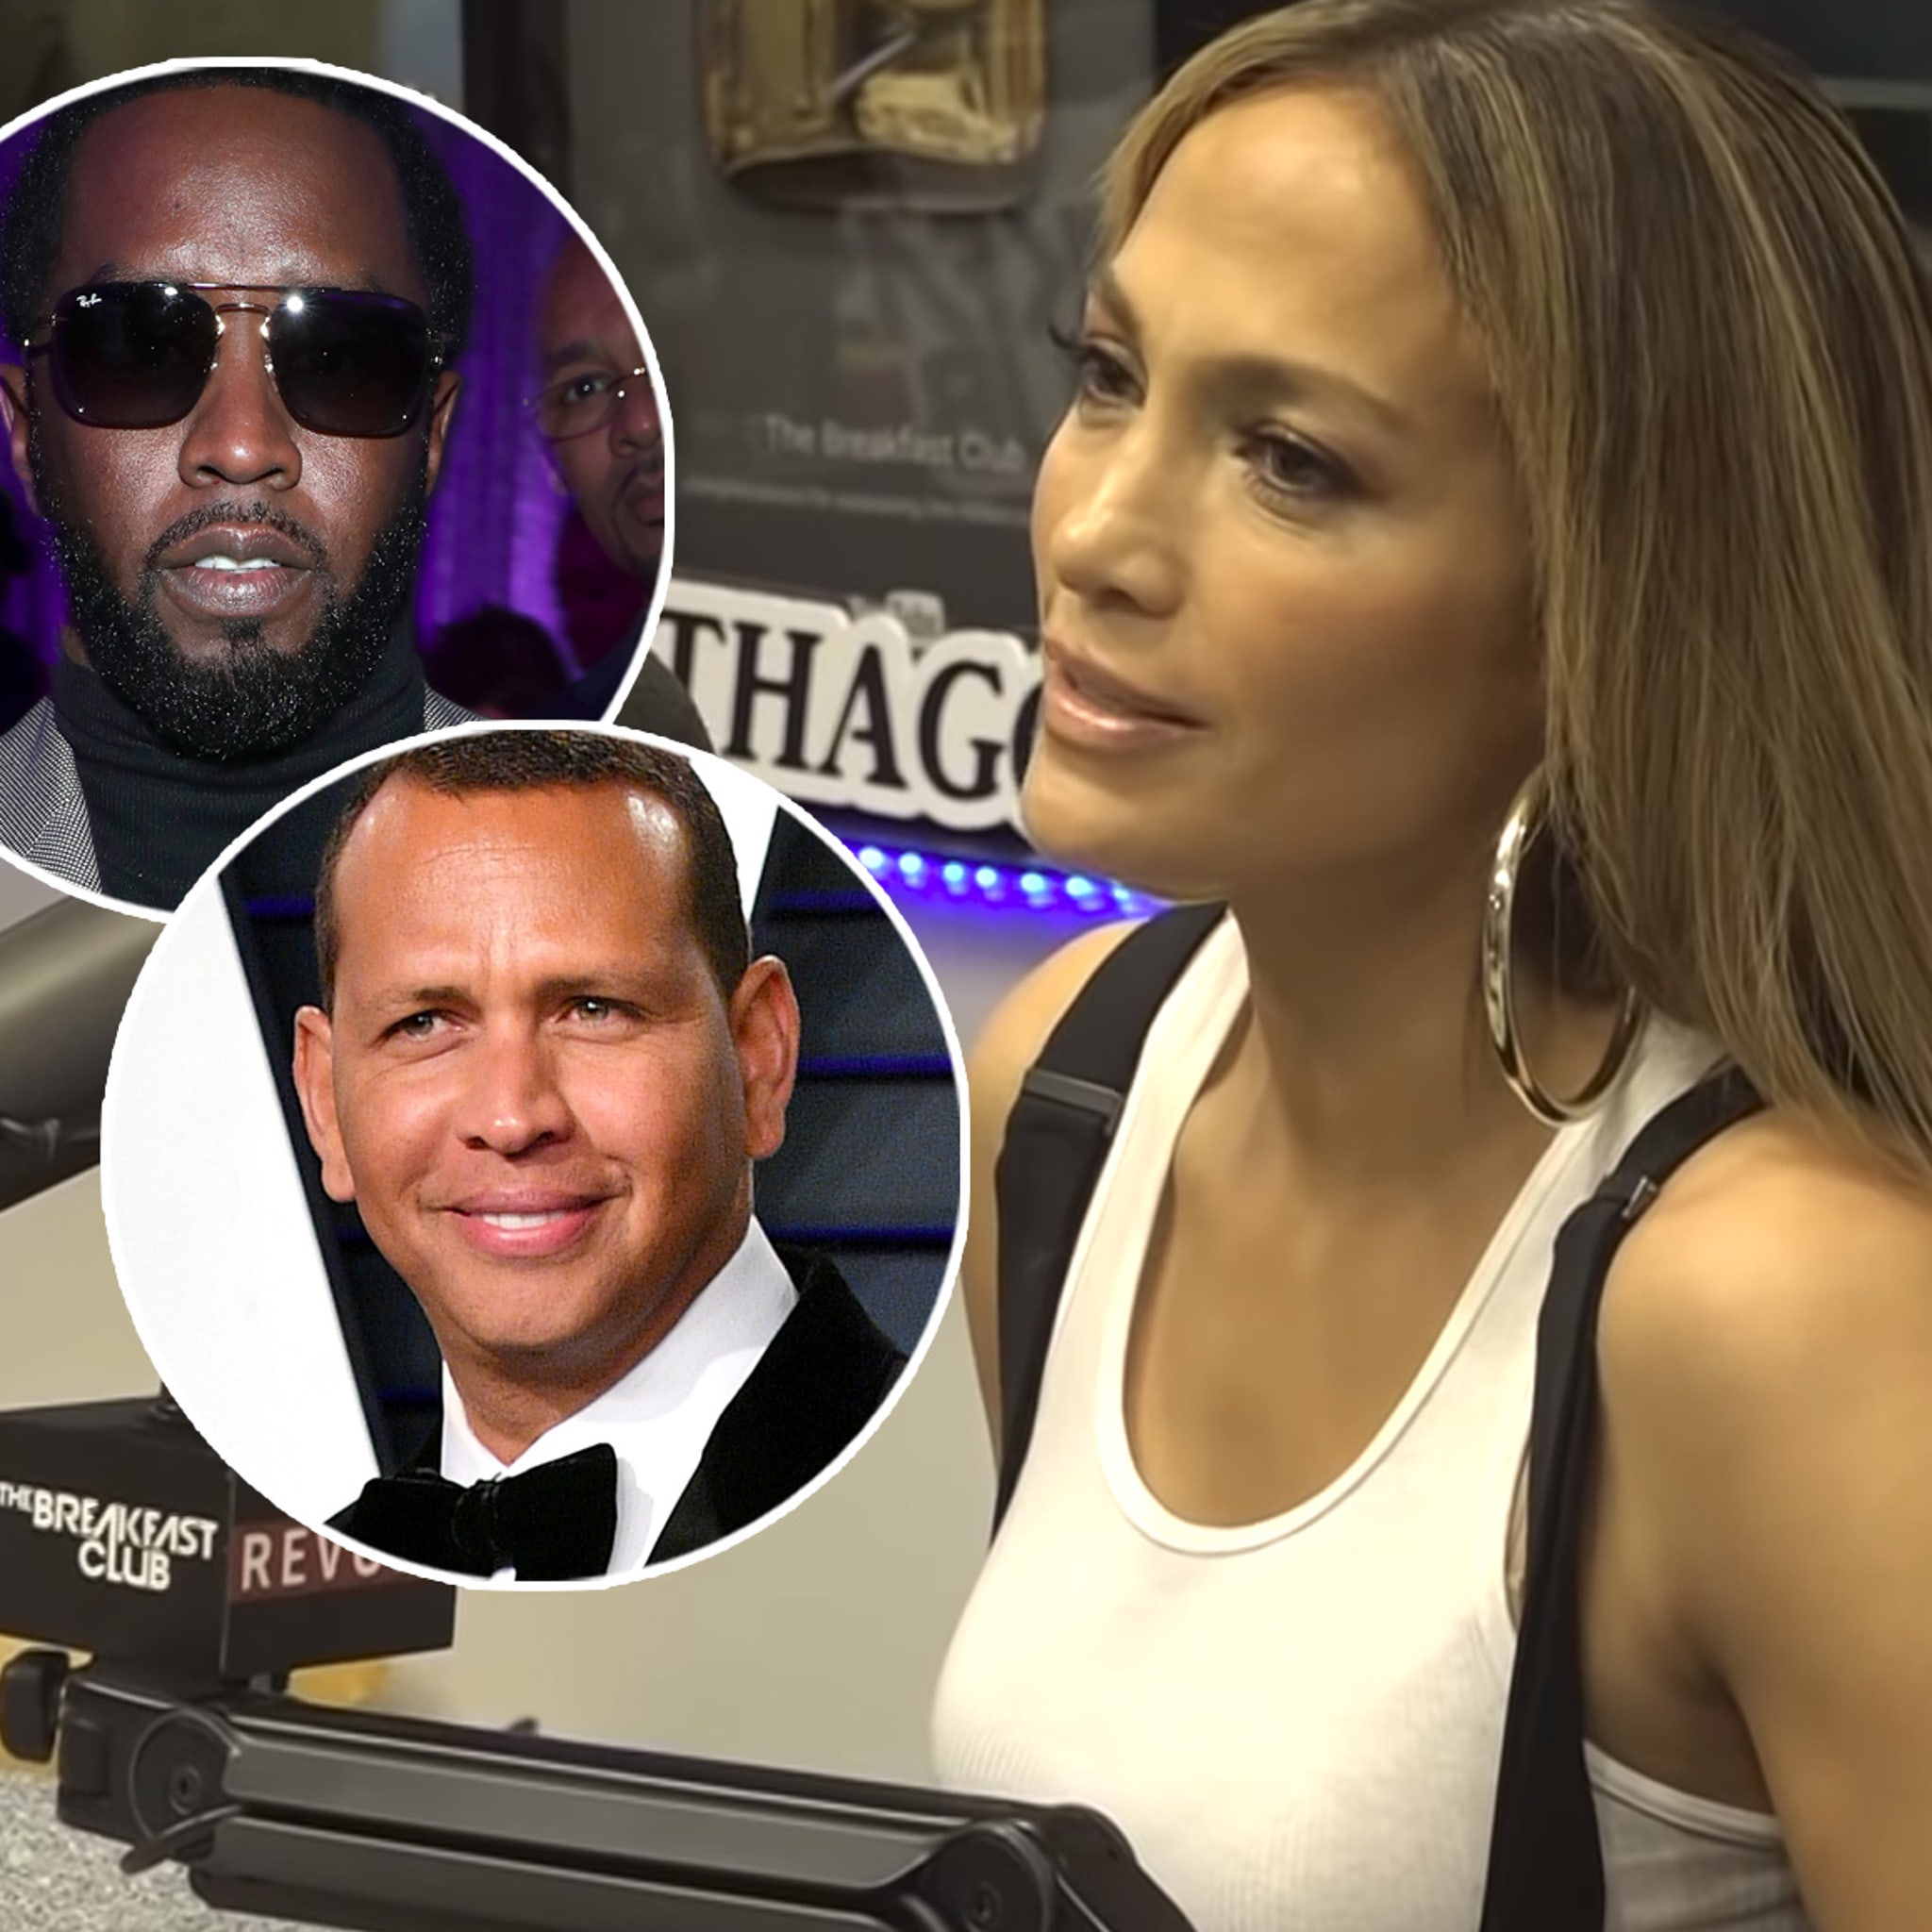 J.Lo on Diddy Apologizing to A-Rod, Canseco, Motown Grammy Tribute - Breakfast Club Interview